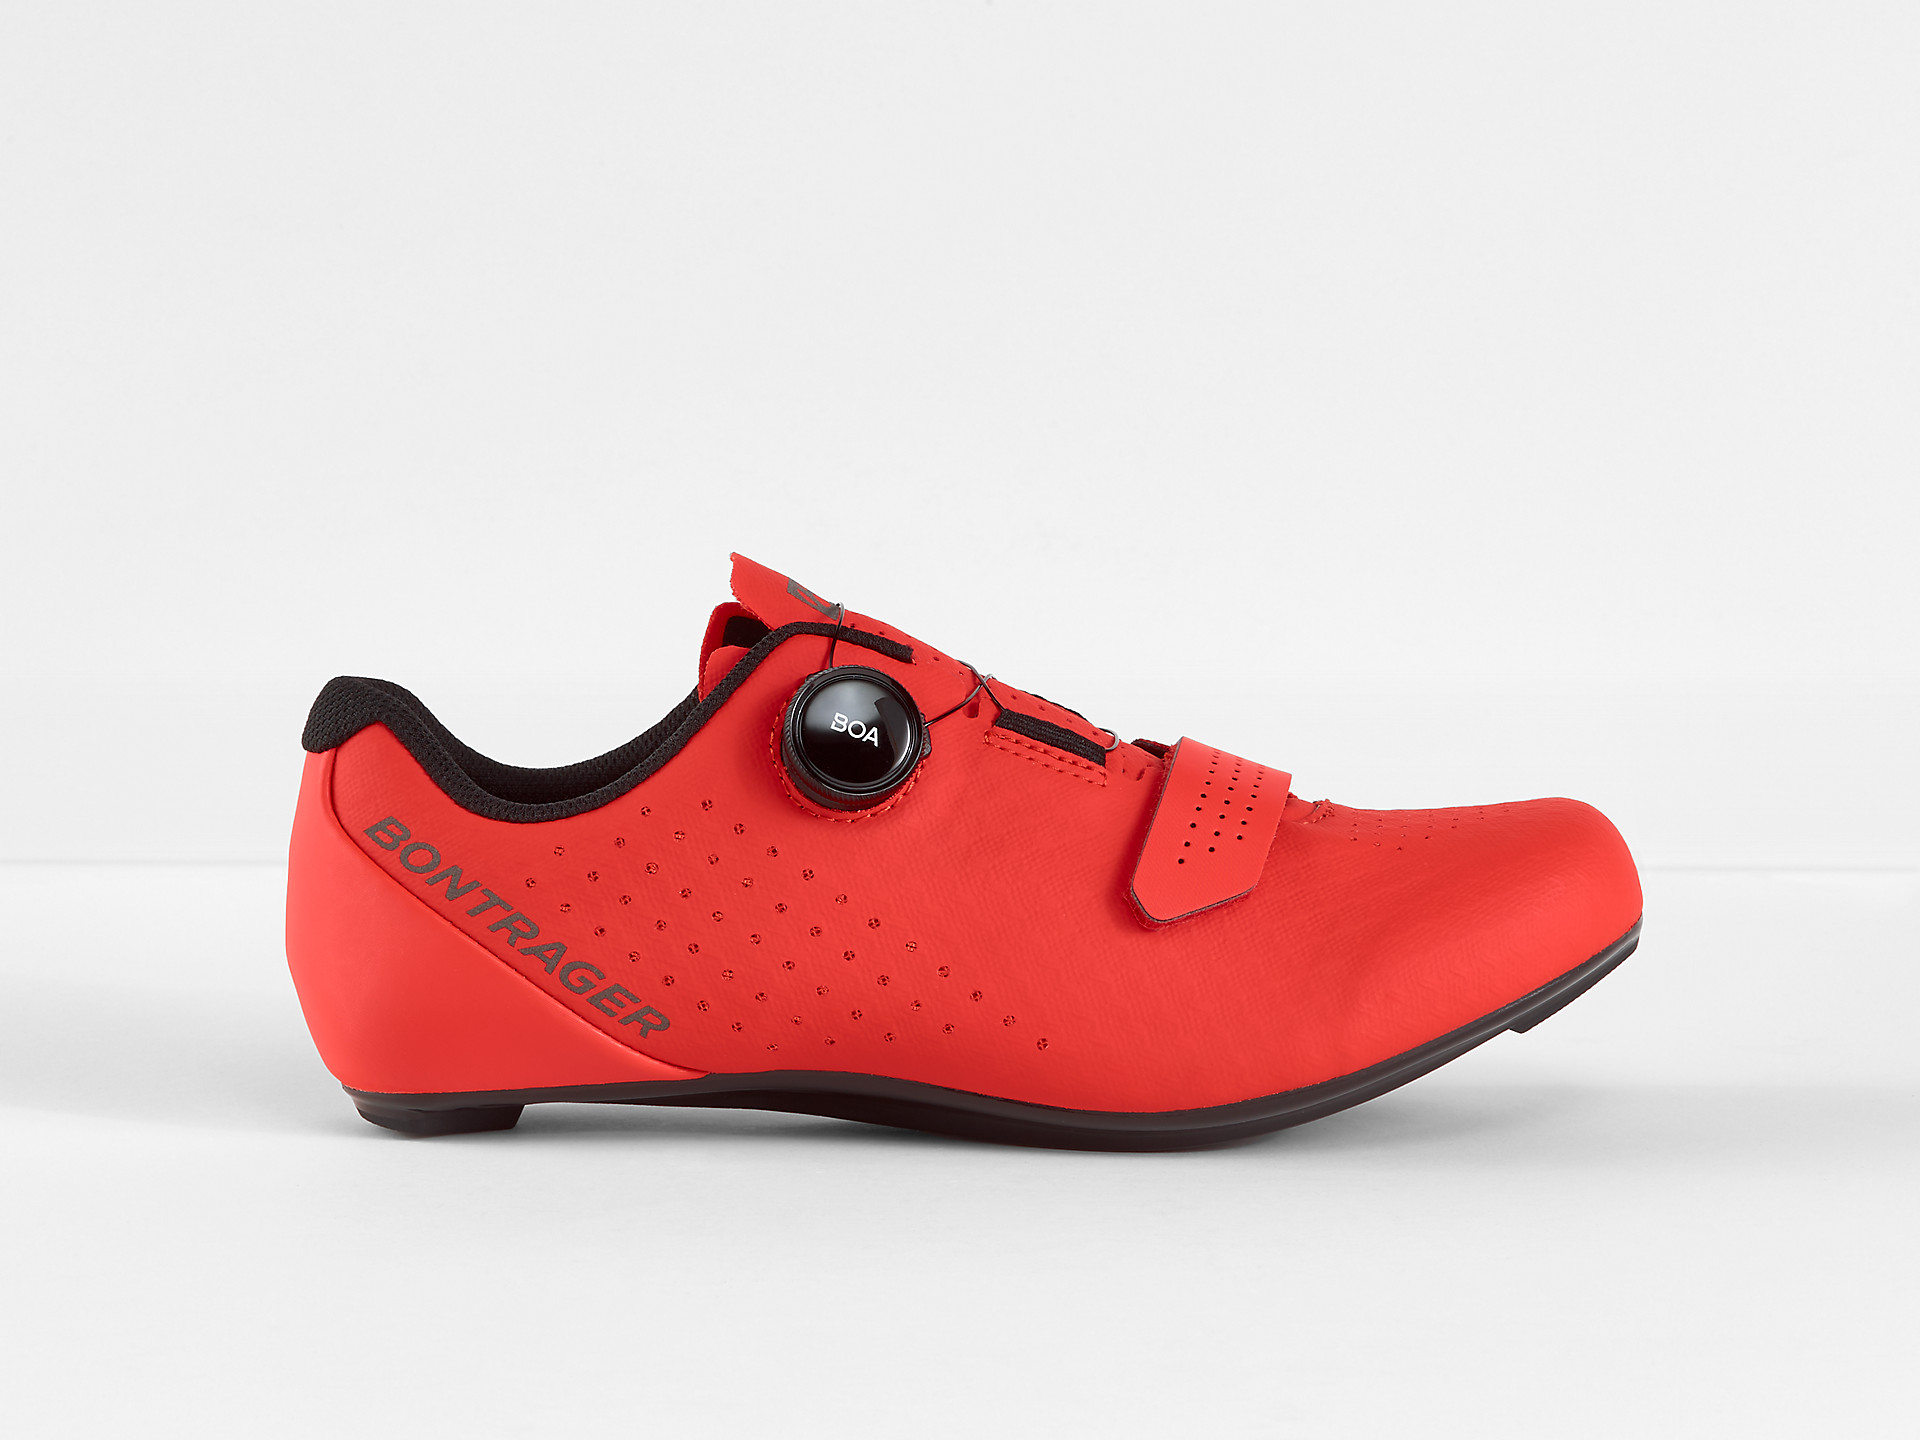 <a href="https://cycles-clement.be/product/chaussure-bont-circuit-race-39-red/">CHAUSSURE BONT CIRCUIT RACE 39 RED</a>